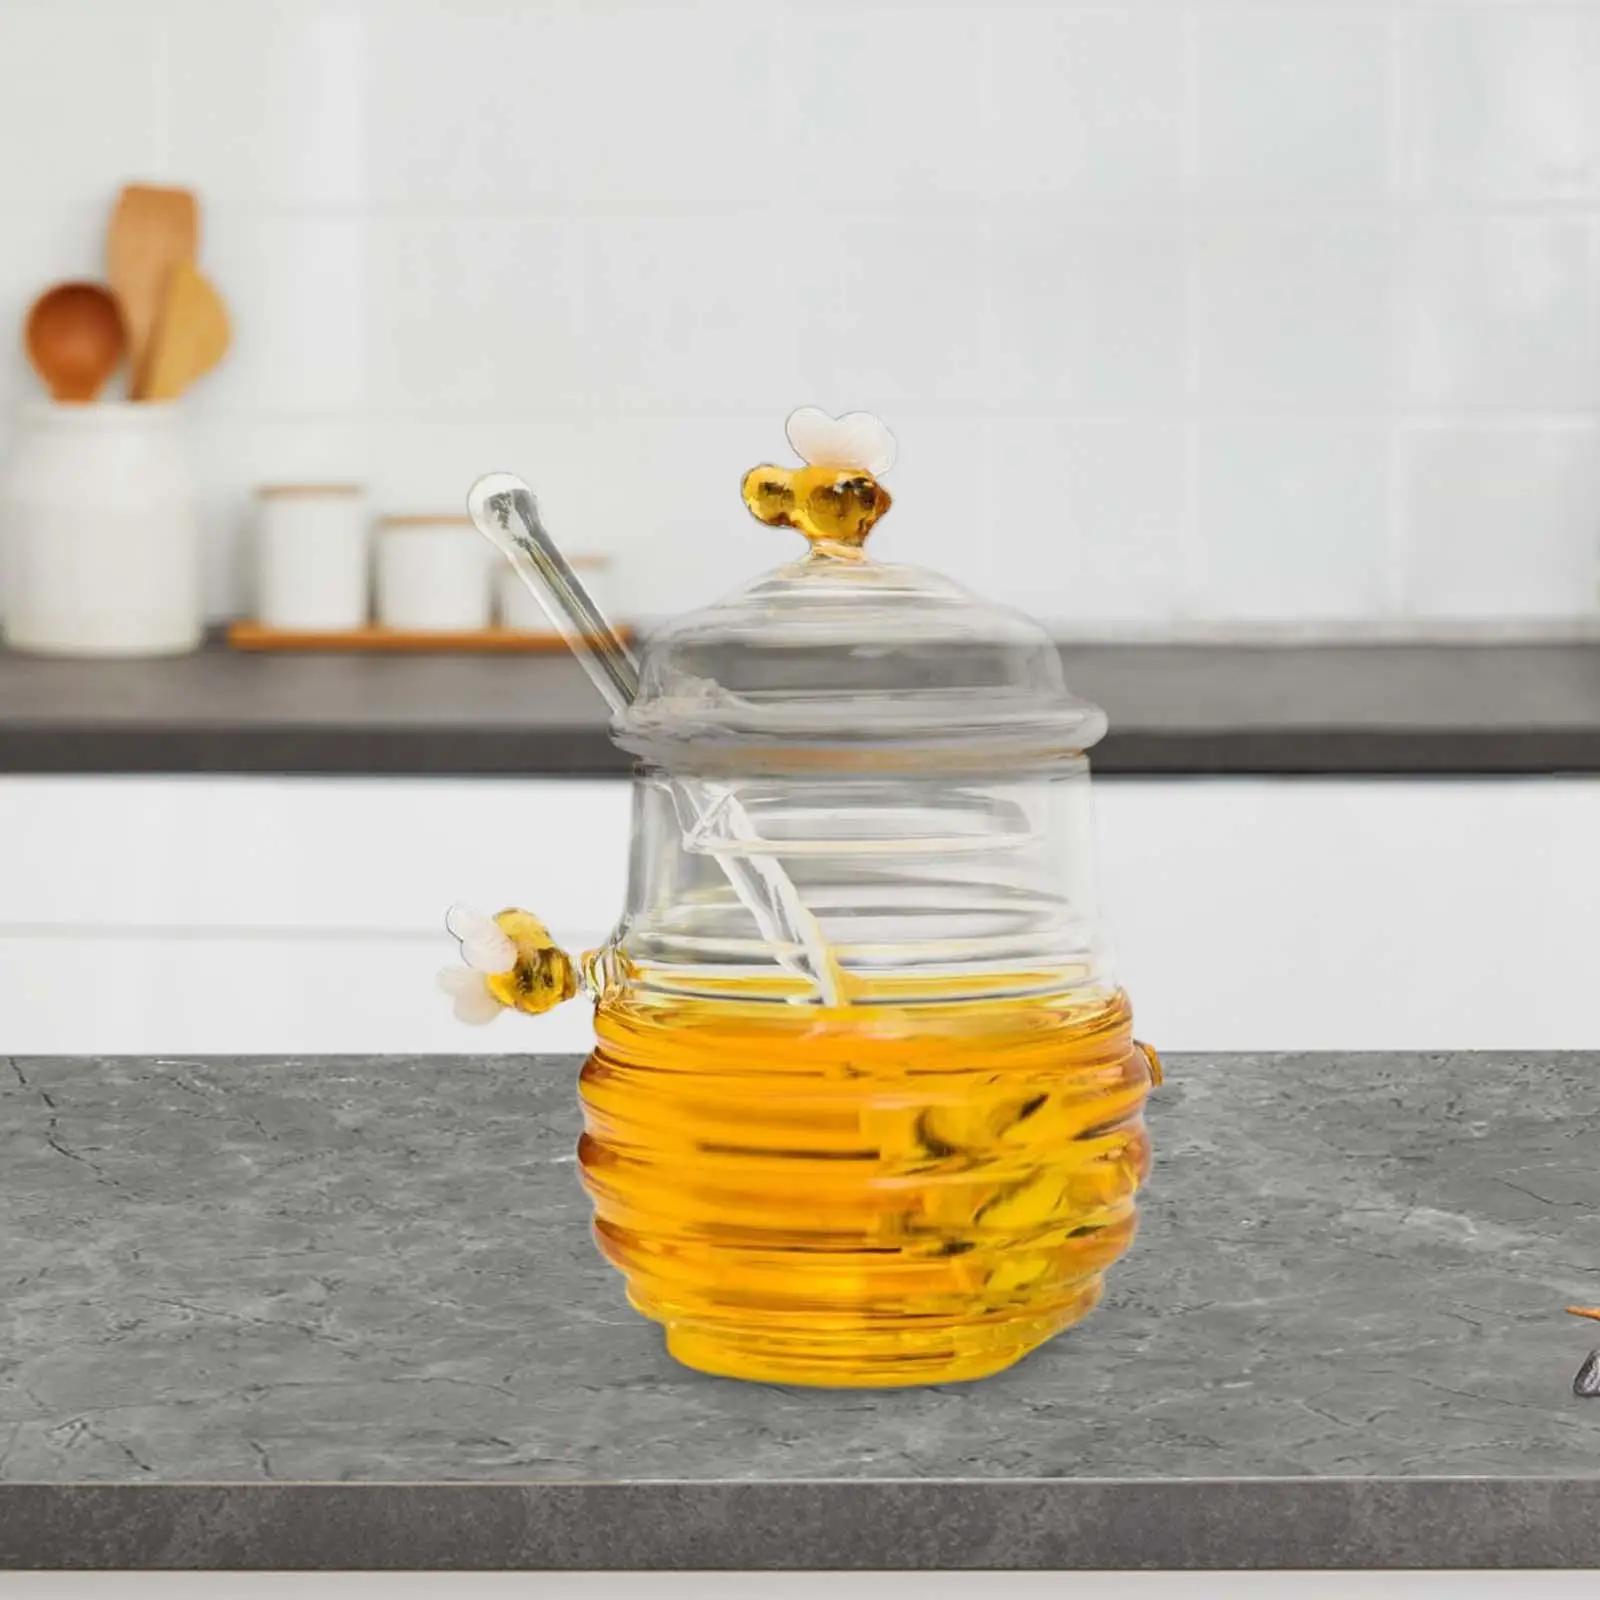 Glass Beehive Honey Pot Clear with Dipper and Lid Honey Bee Pot Dispenser for Office Home Kitchen Syrup Wedding Party